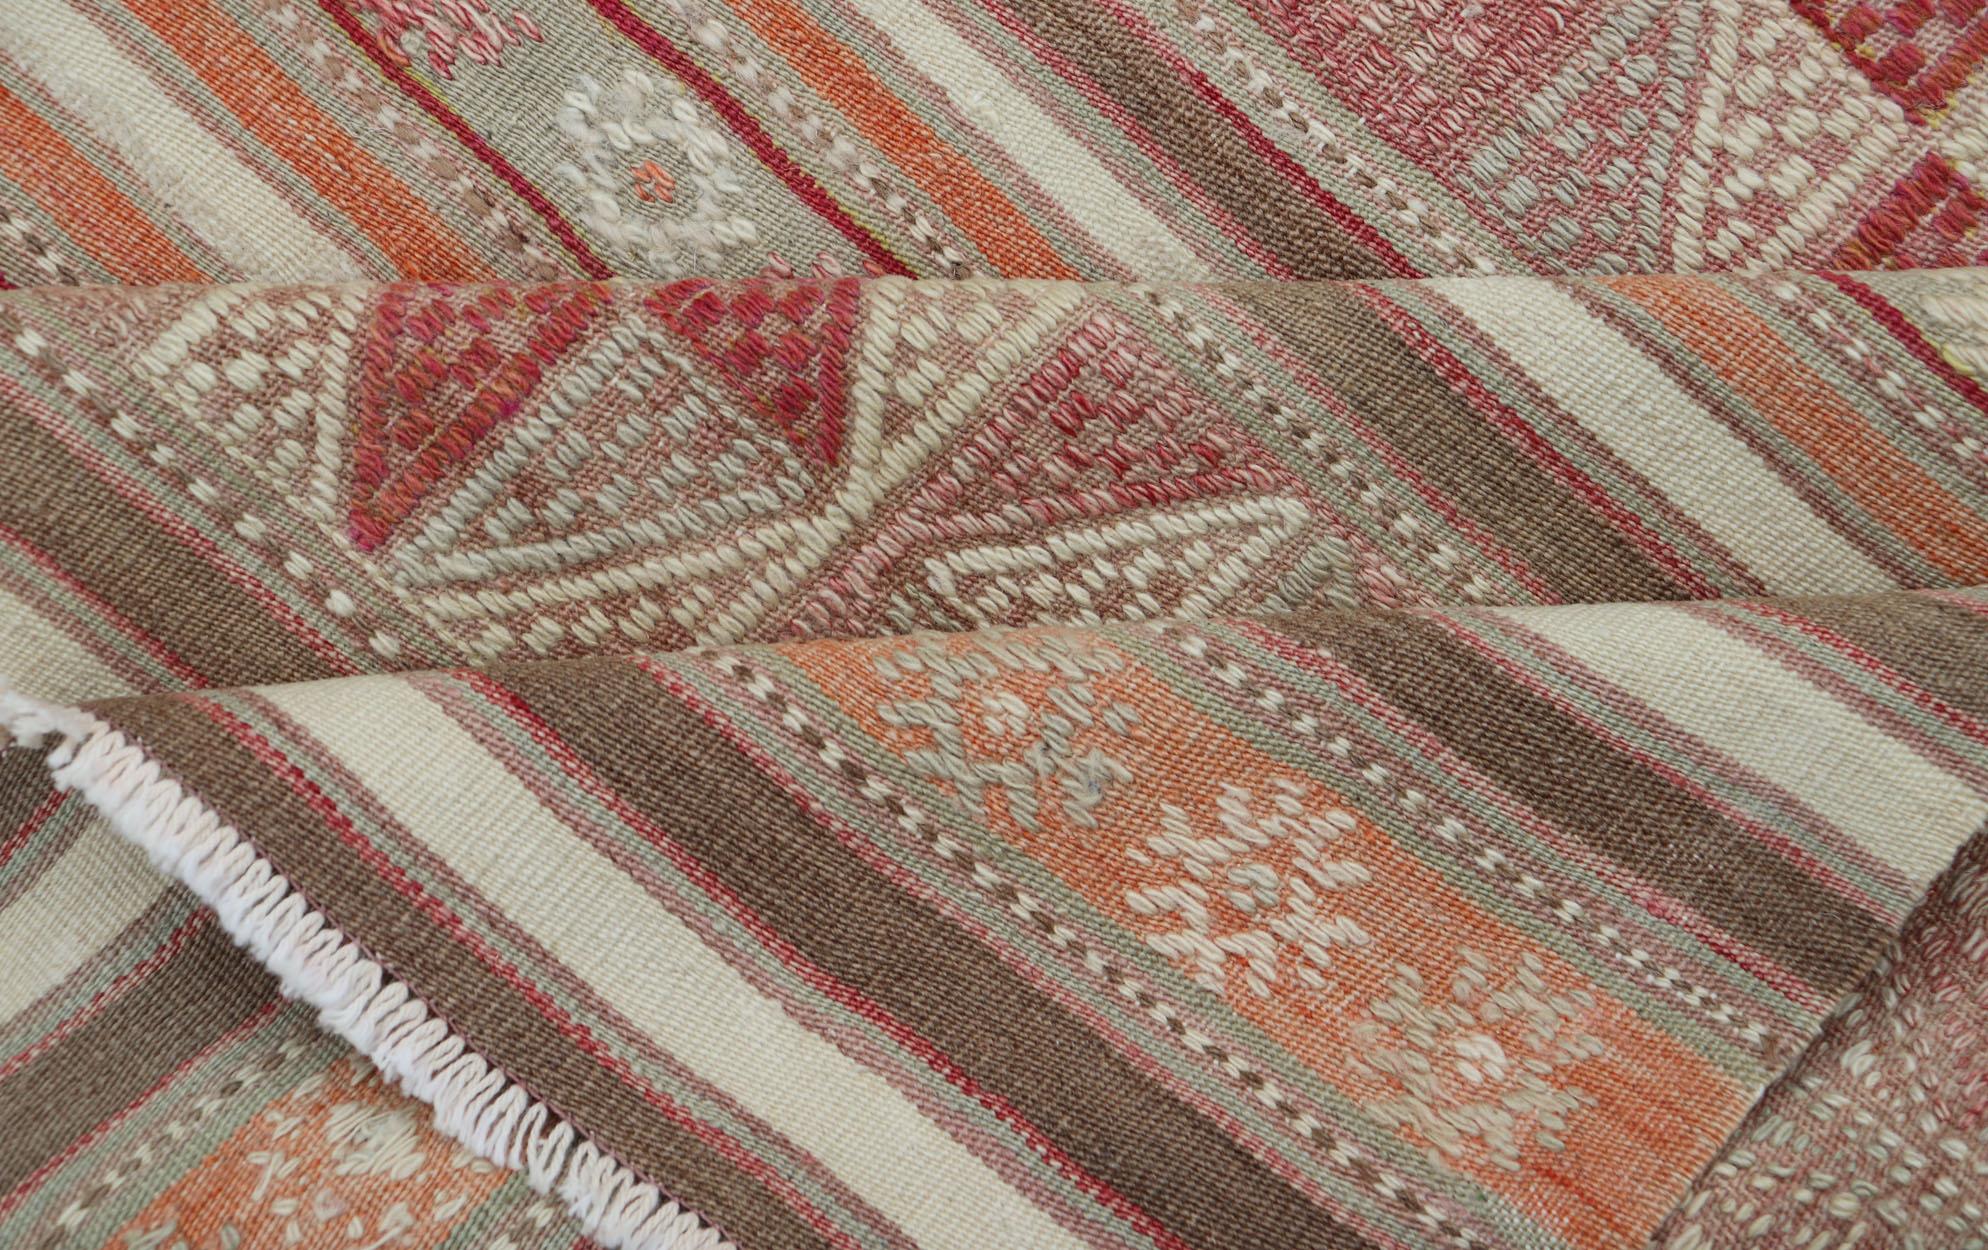 Colorful Turkish Vintage Embroidered Kilim with Stripes and Geometric Motifs For Sale 3